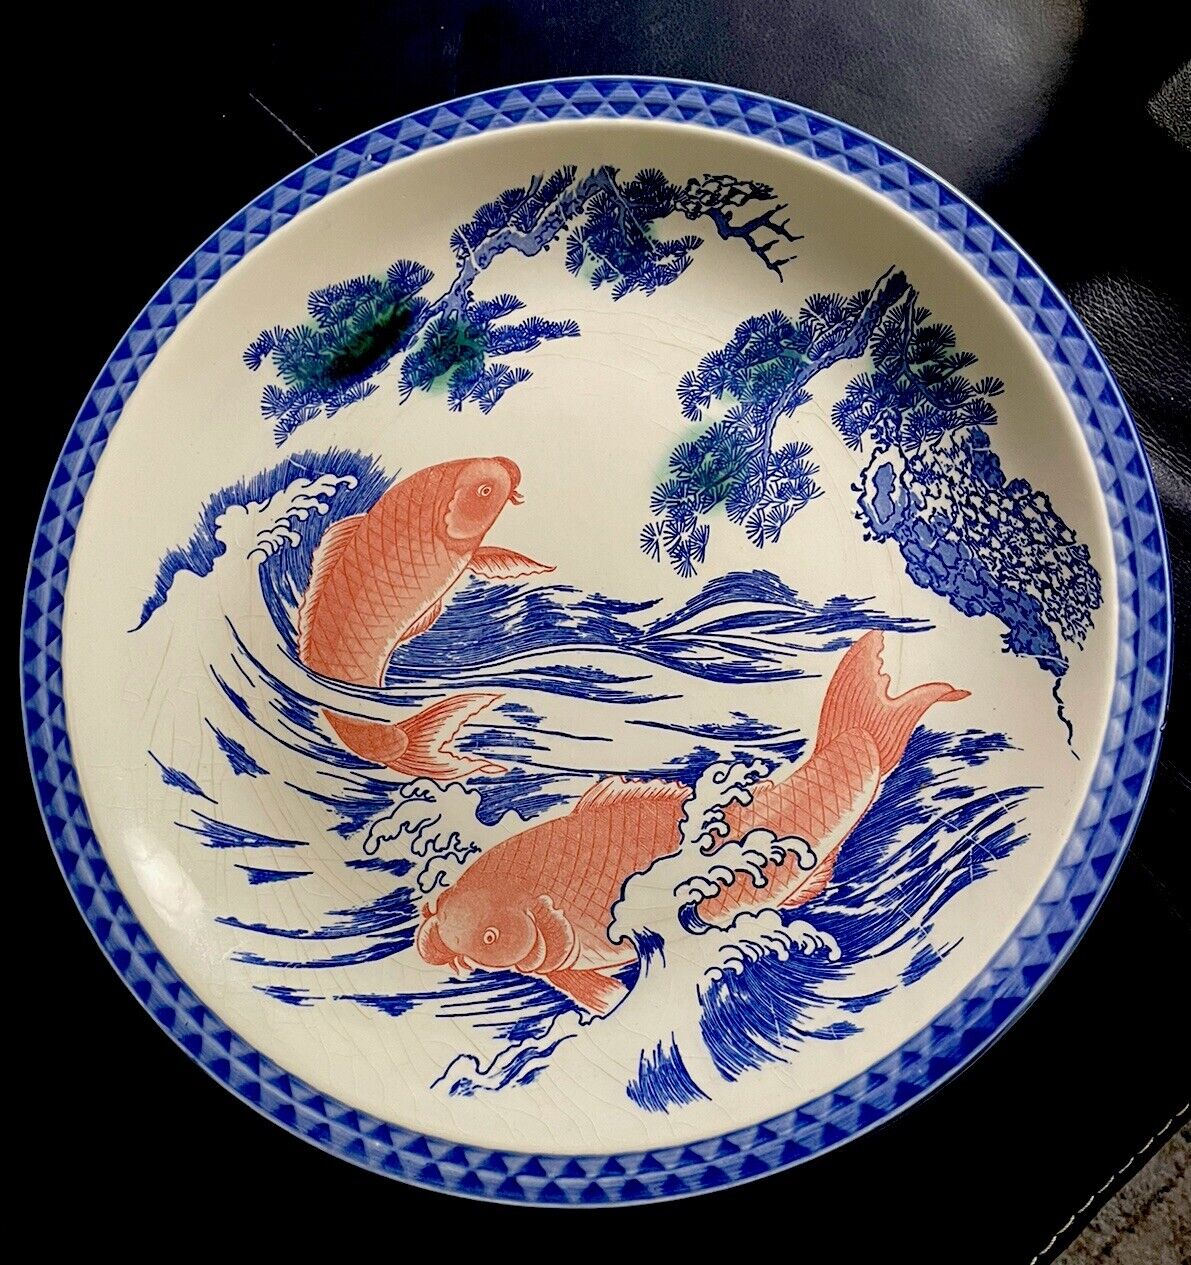 Vintage Japanese Blue & White koi fish 14.5” porcelain charger plate Unmarked